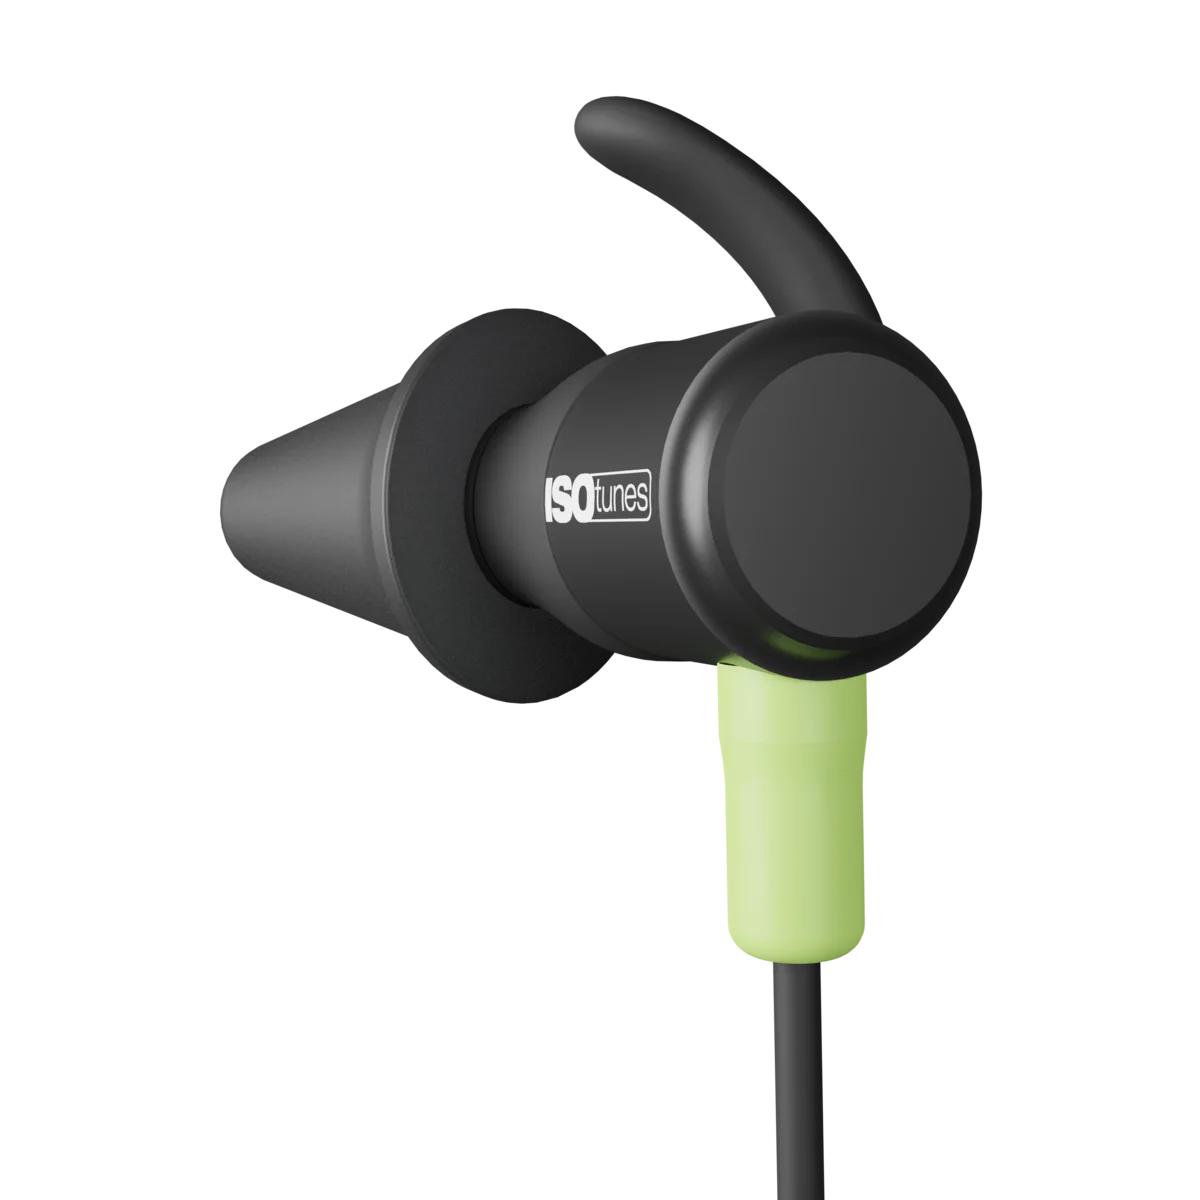 ISOtunes LITE Safety Earbuds for Hearing Protection